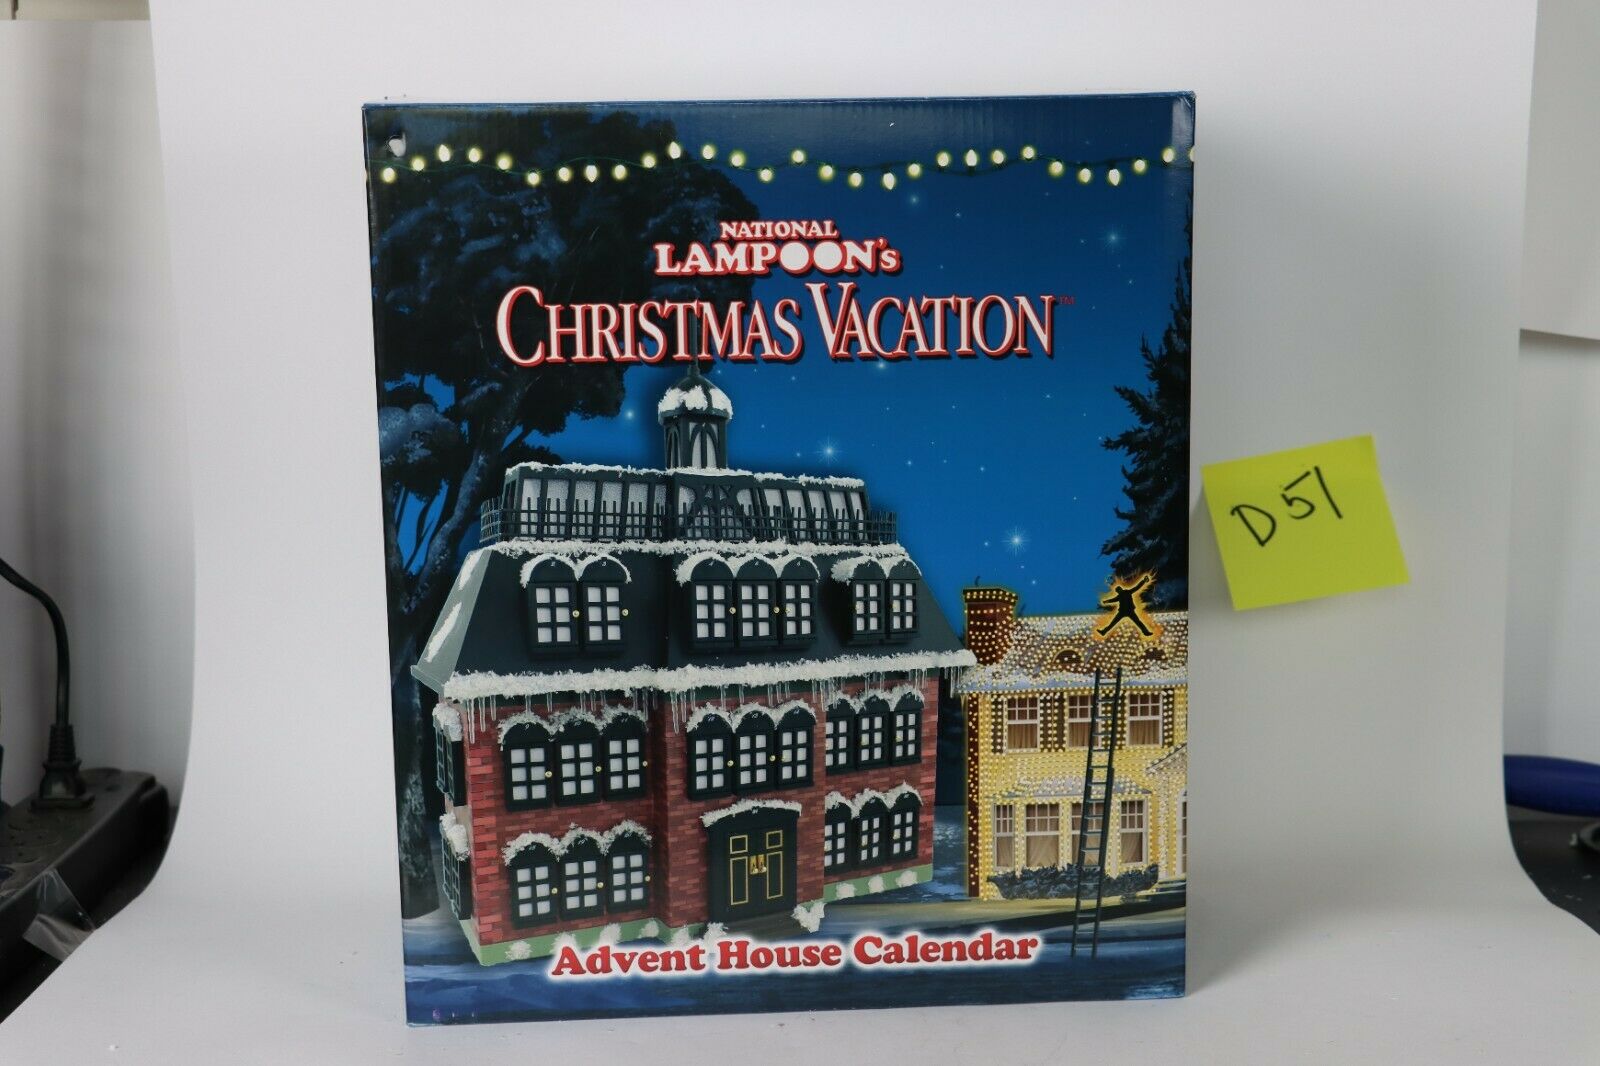 Advent House Calendar From National Lampoon's Christmas Vacation Blemish D51